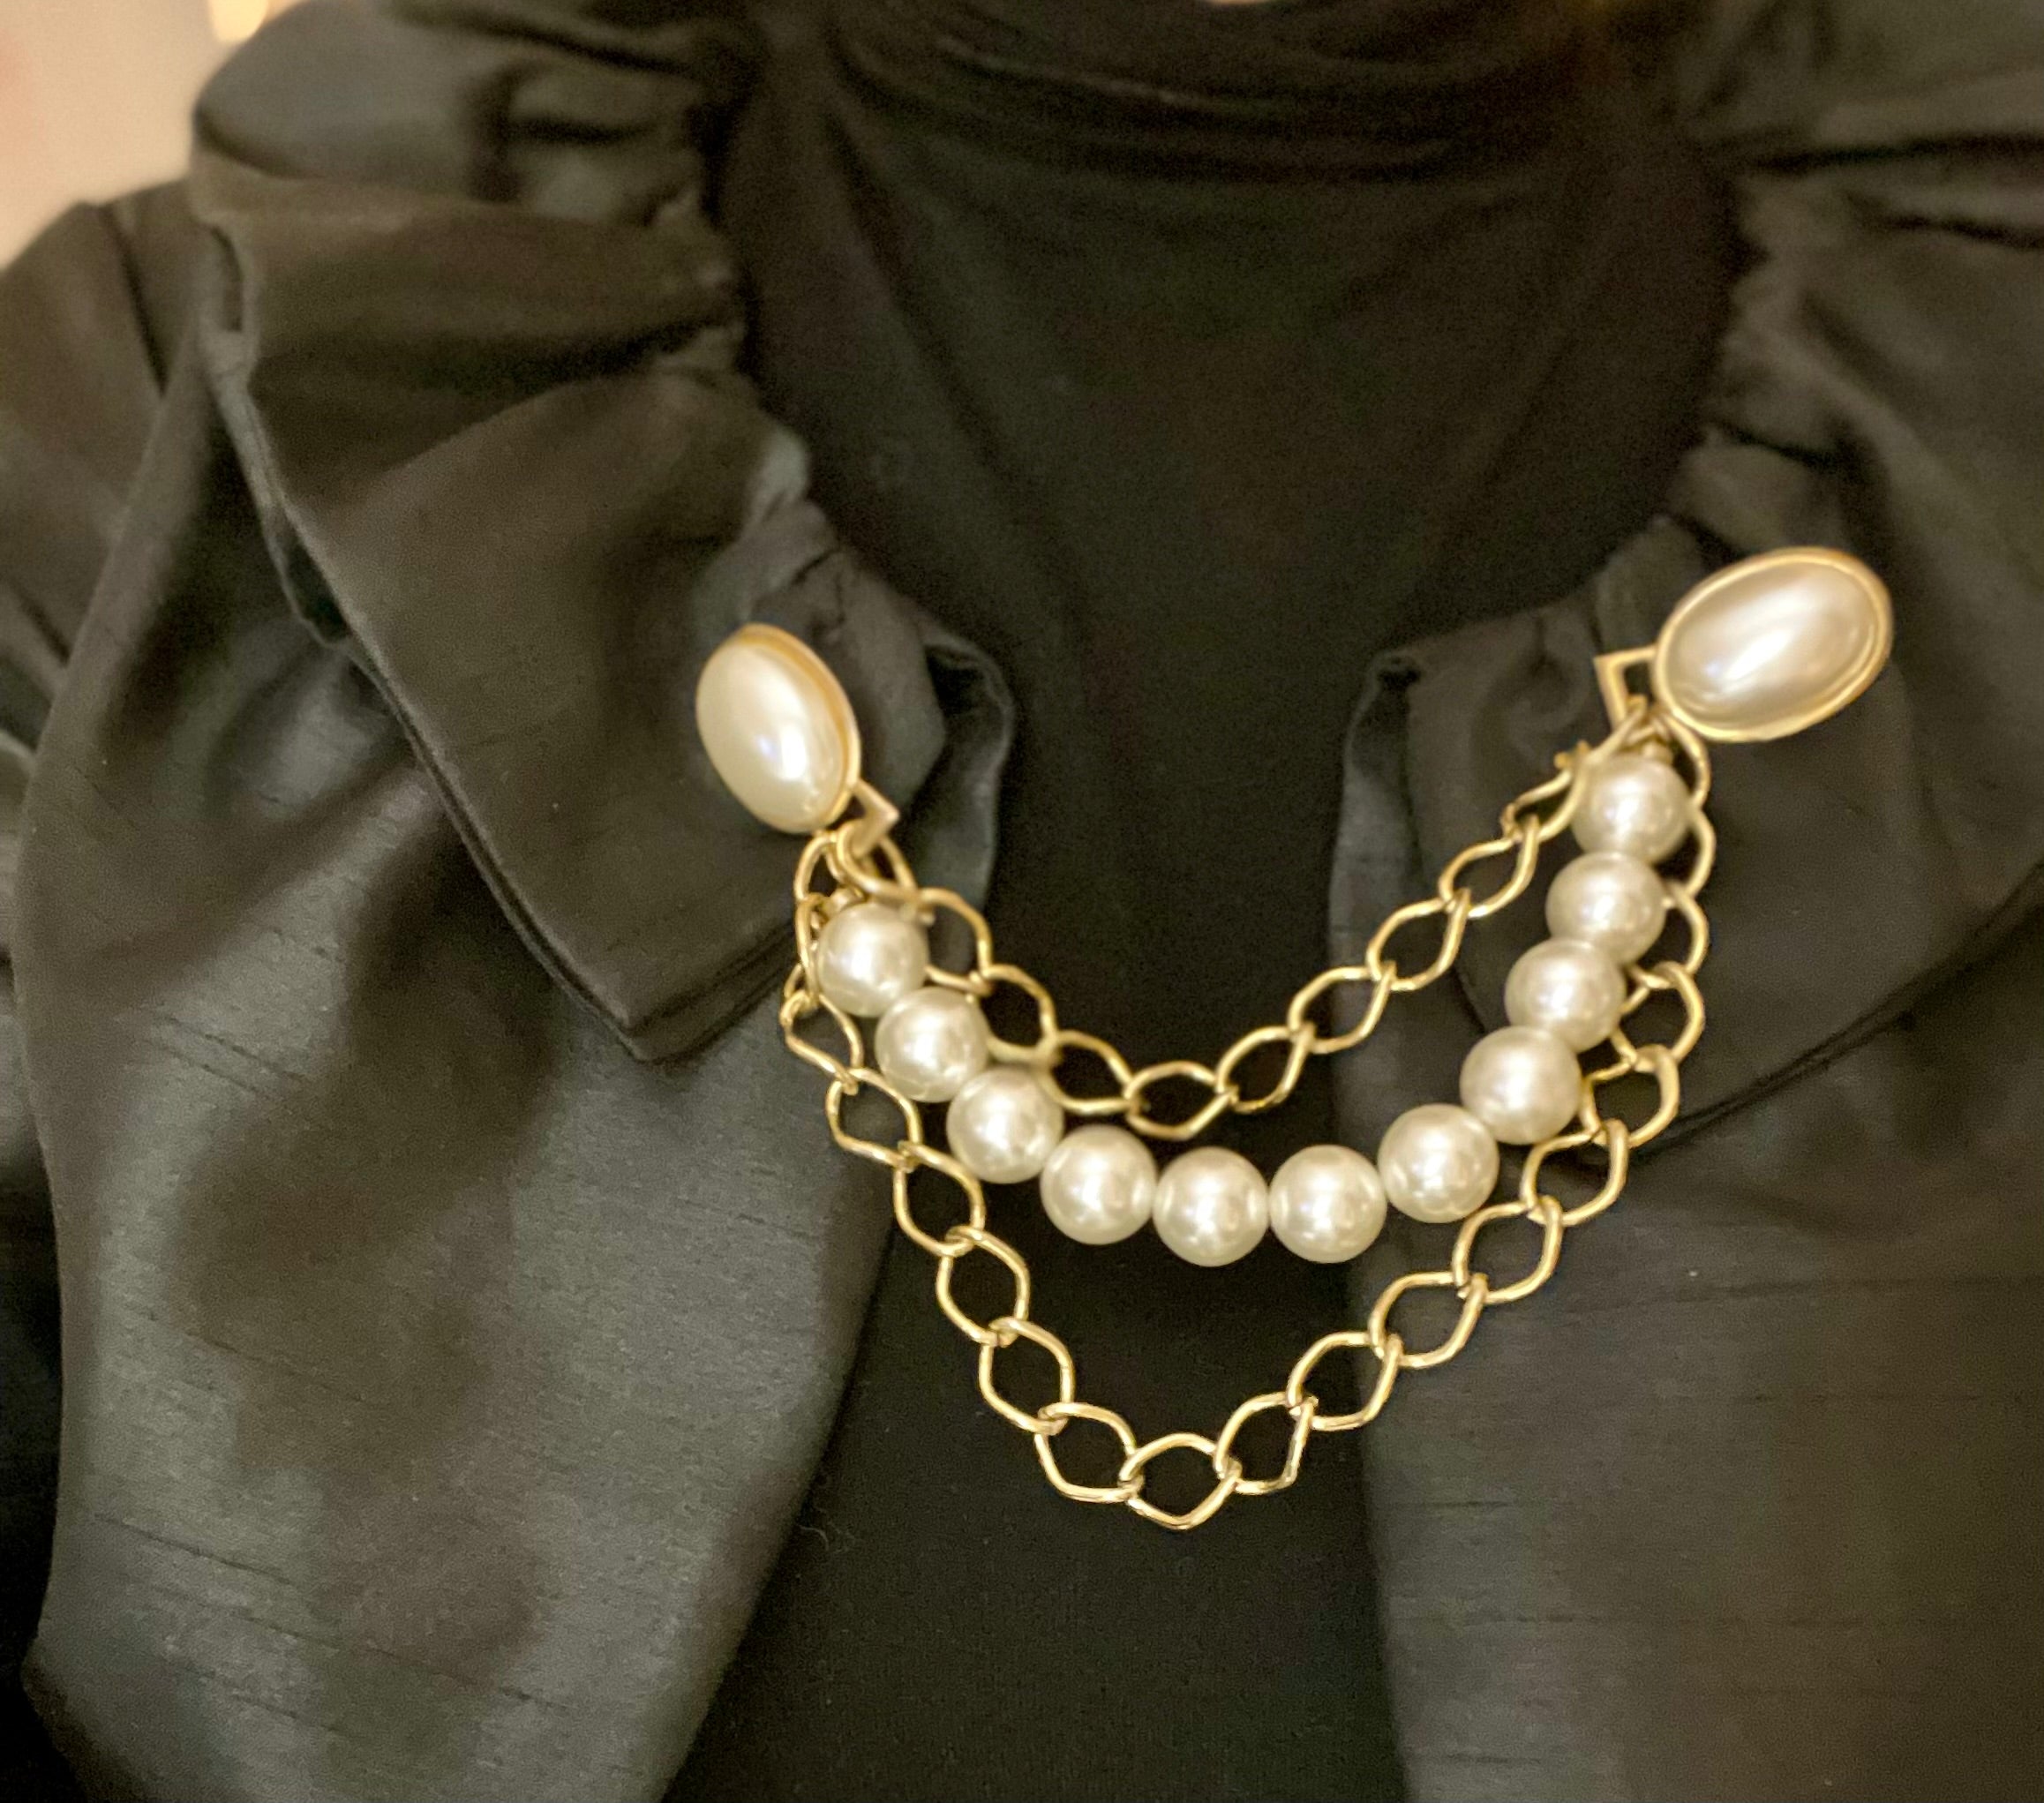 Simply divine pearl, and chain sweater connector. So elegant...